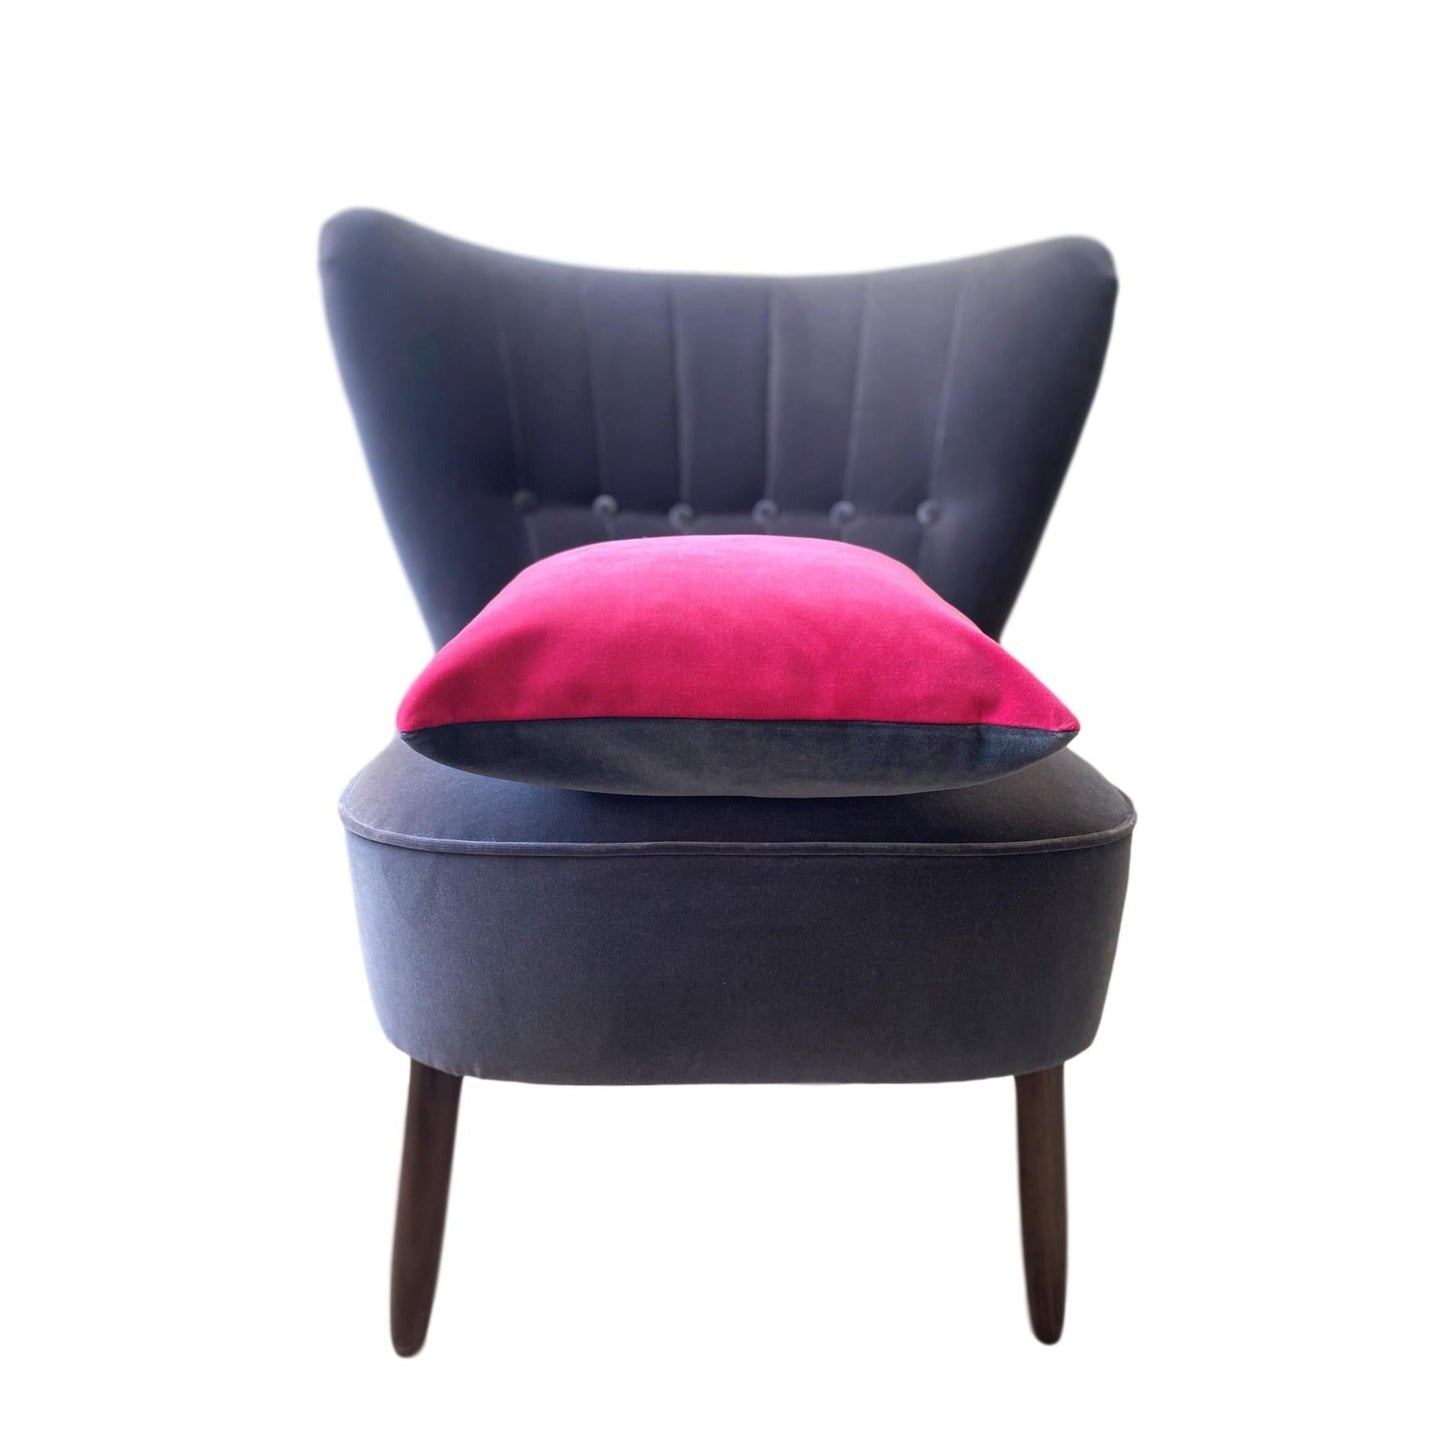 Bright Pink Velvet Cushion Cover with Dark Grey-Luxe 39